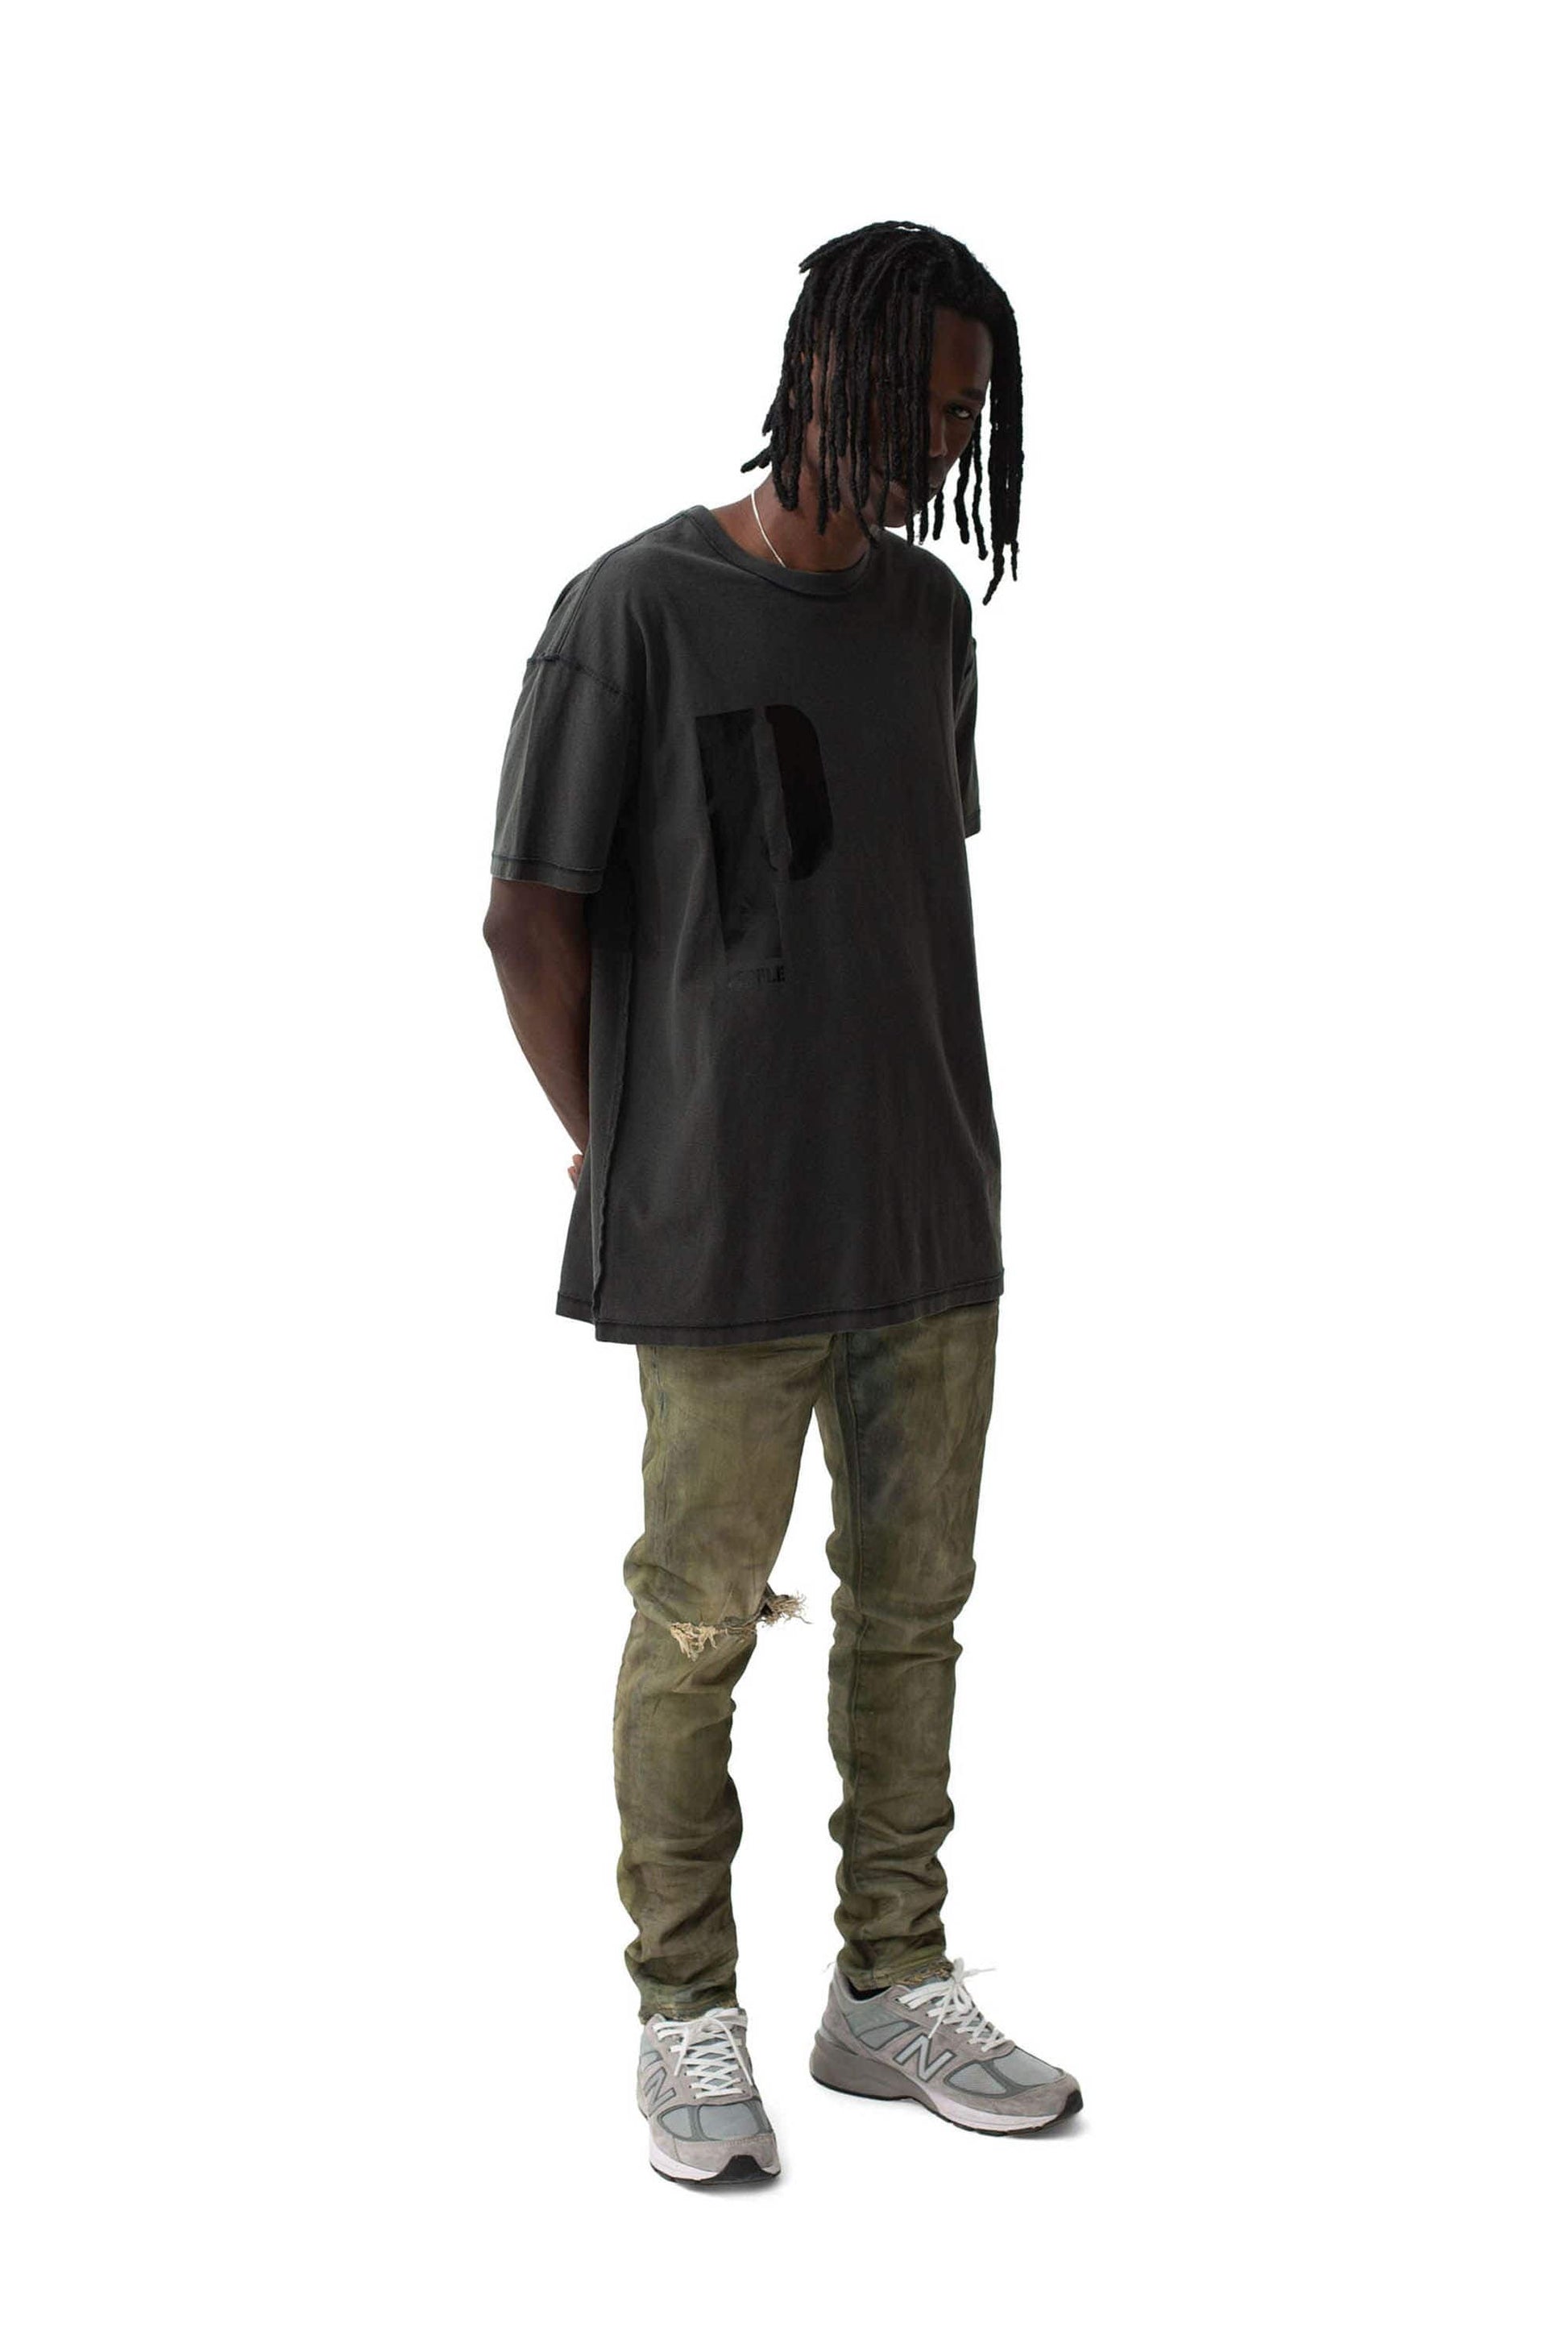 PURPLE BRAND - Men's Relaxed Fit T-Shirt - Style No. P101 - Oversized P Black - Model Styled Pose